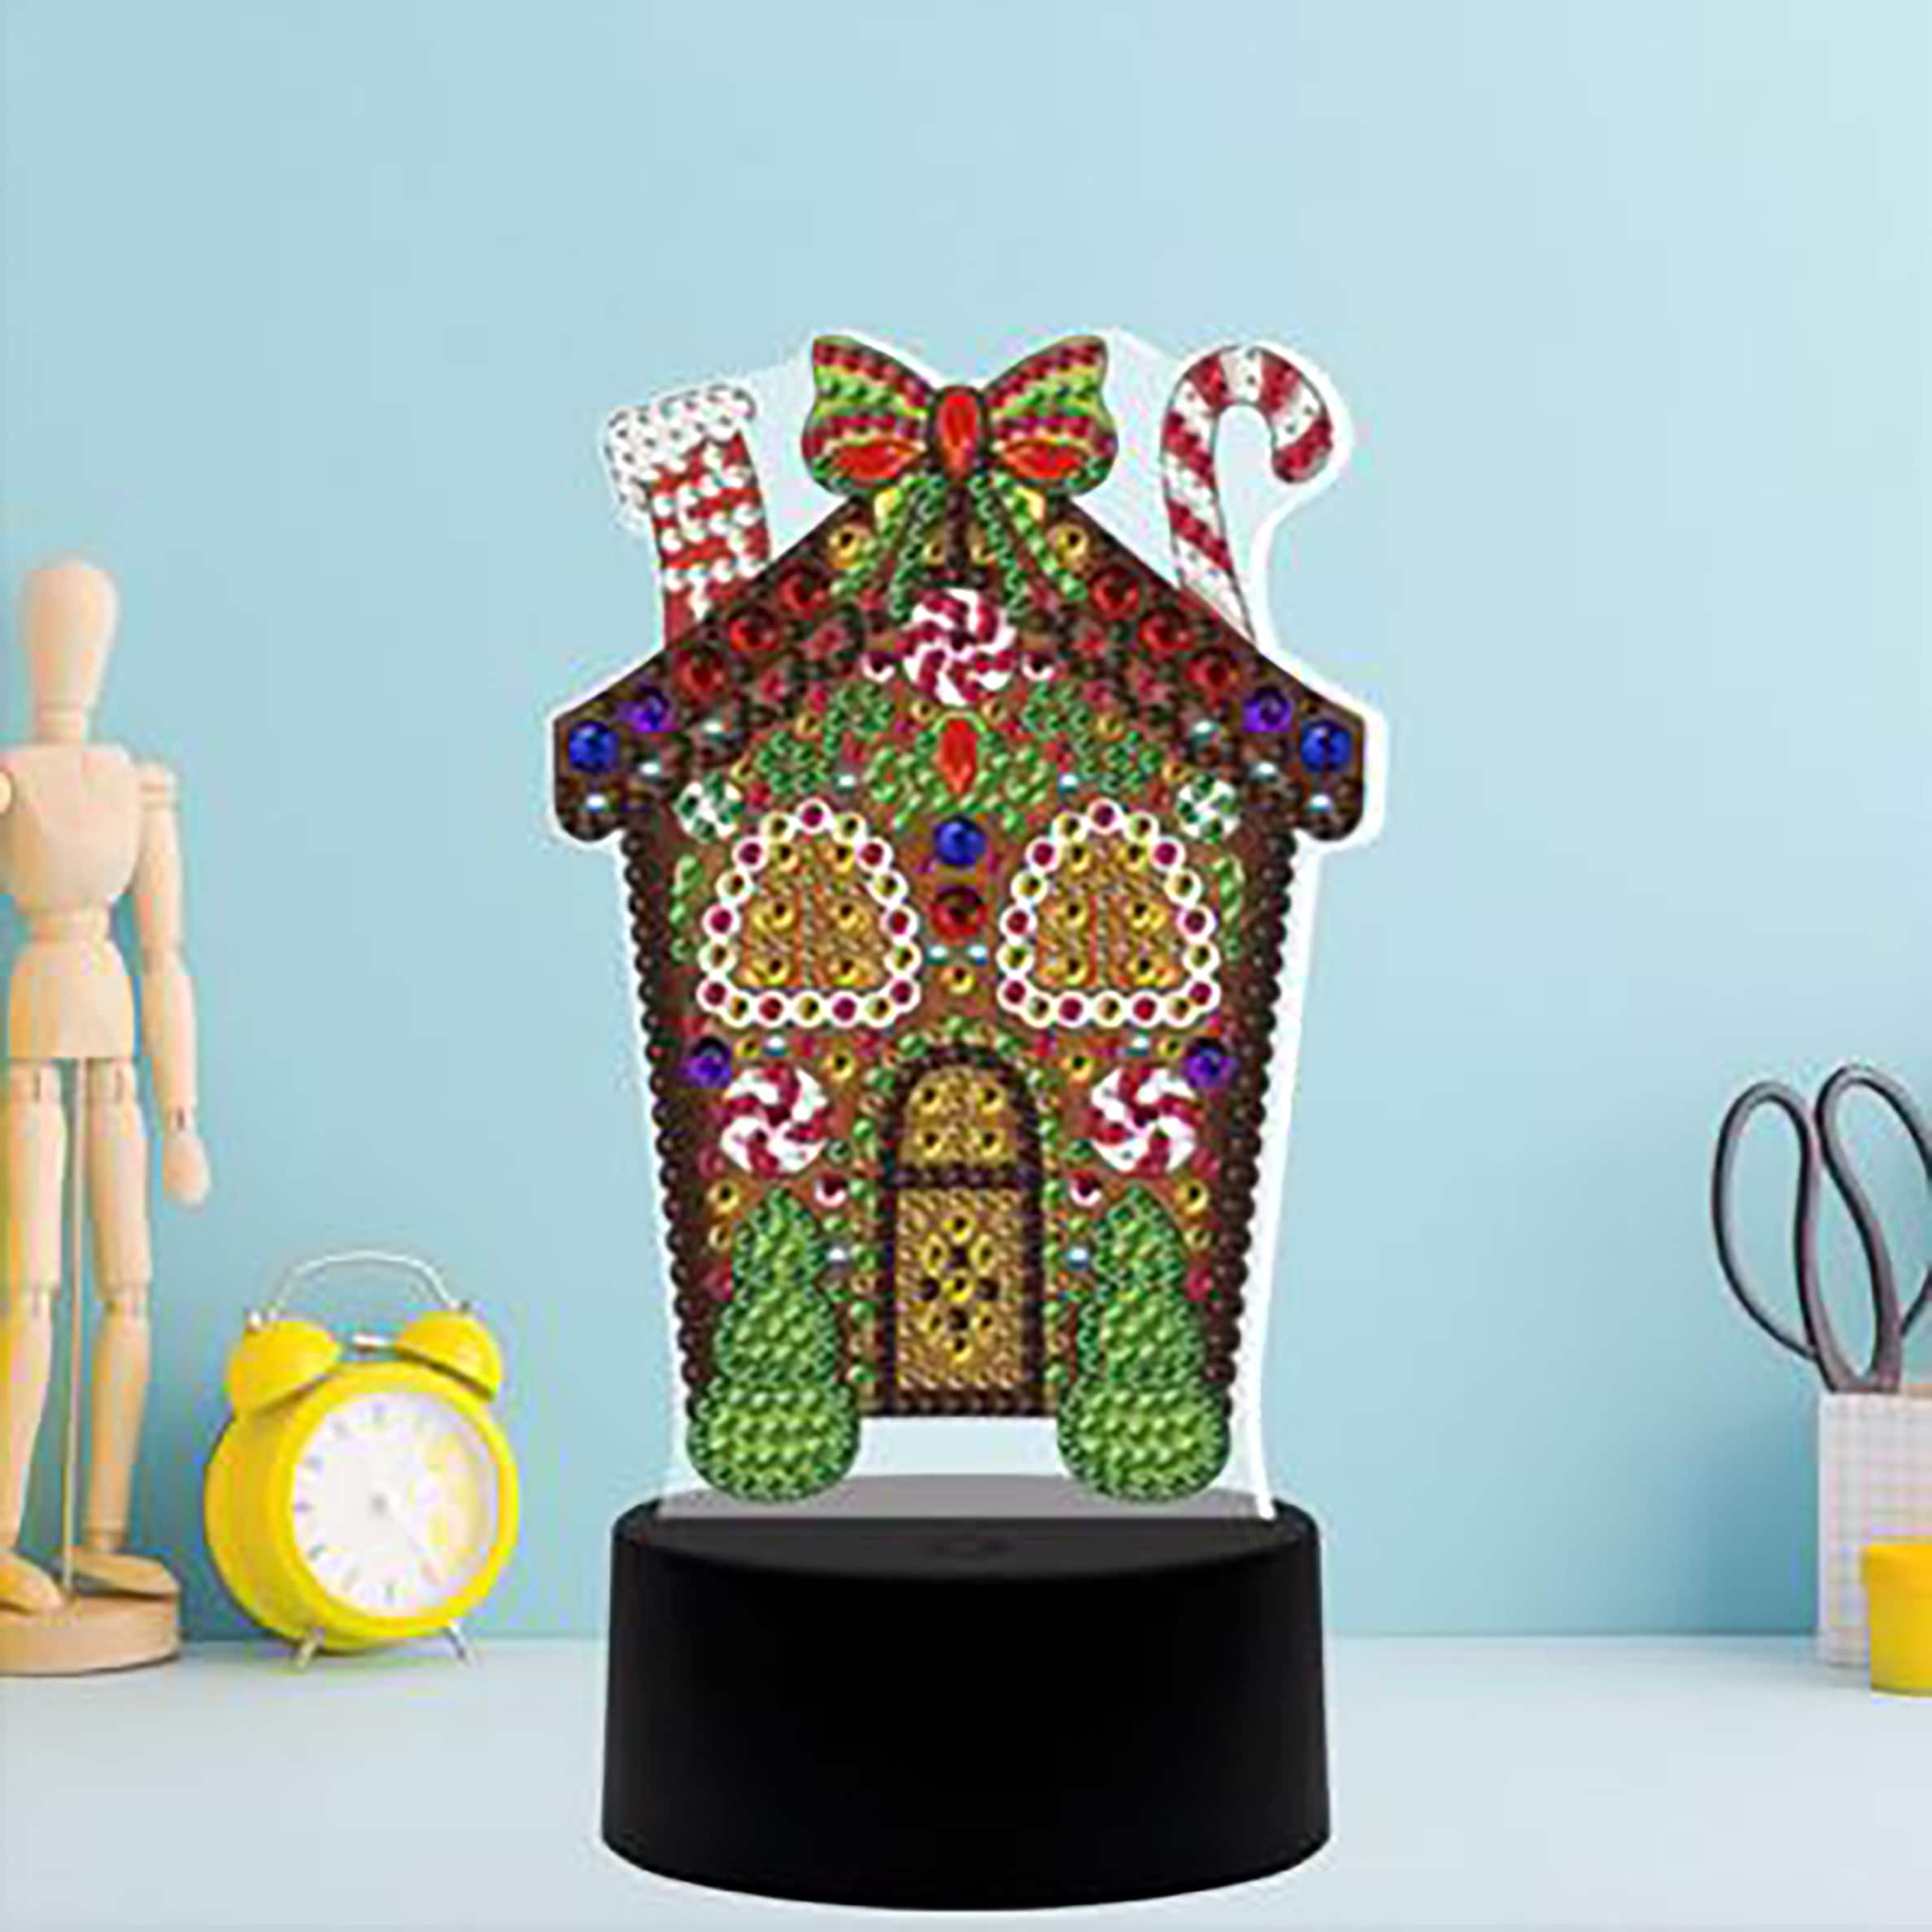 Sparkly Selections Gingerbread House Lamp Diamond Art Kit